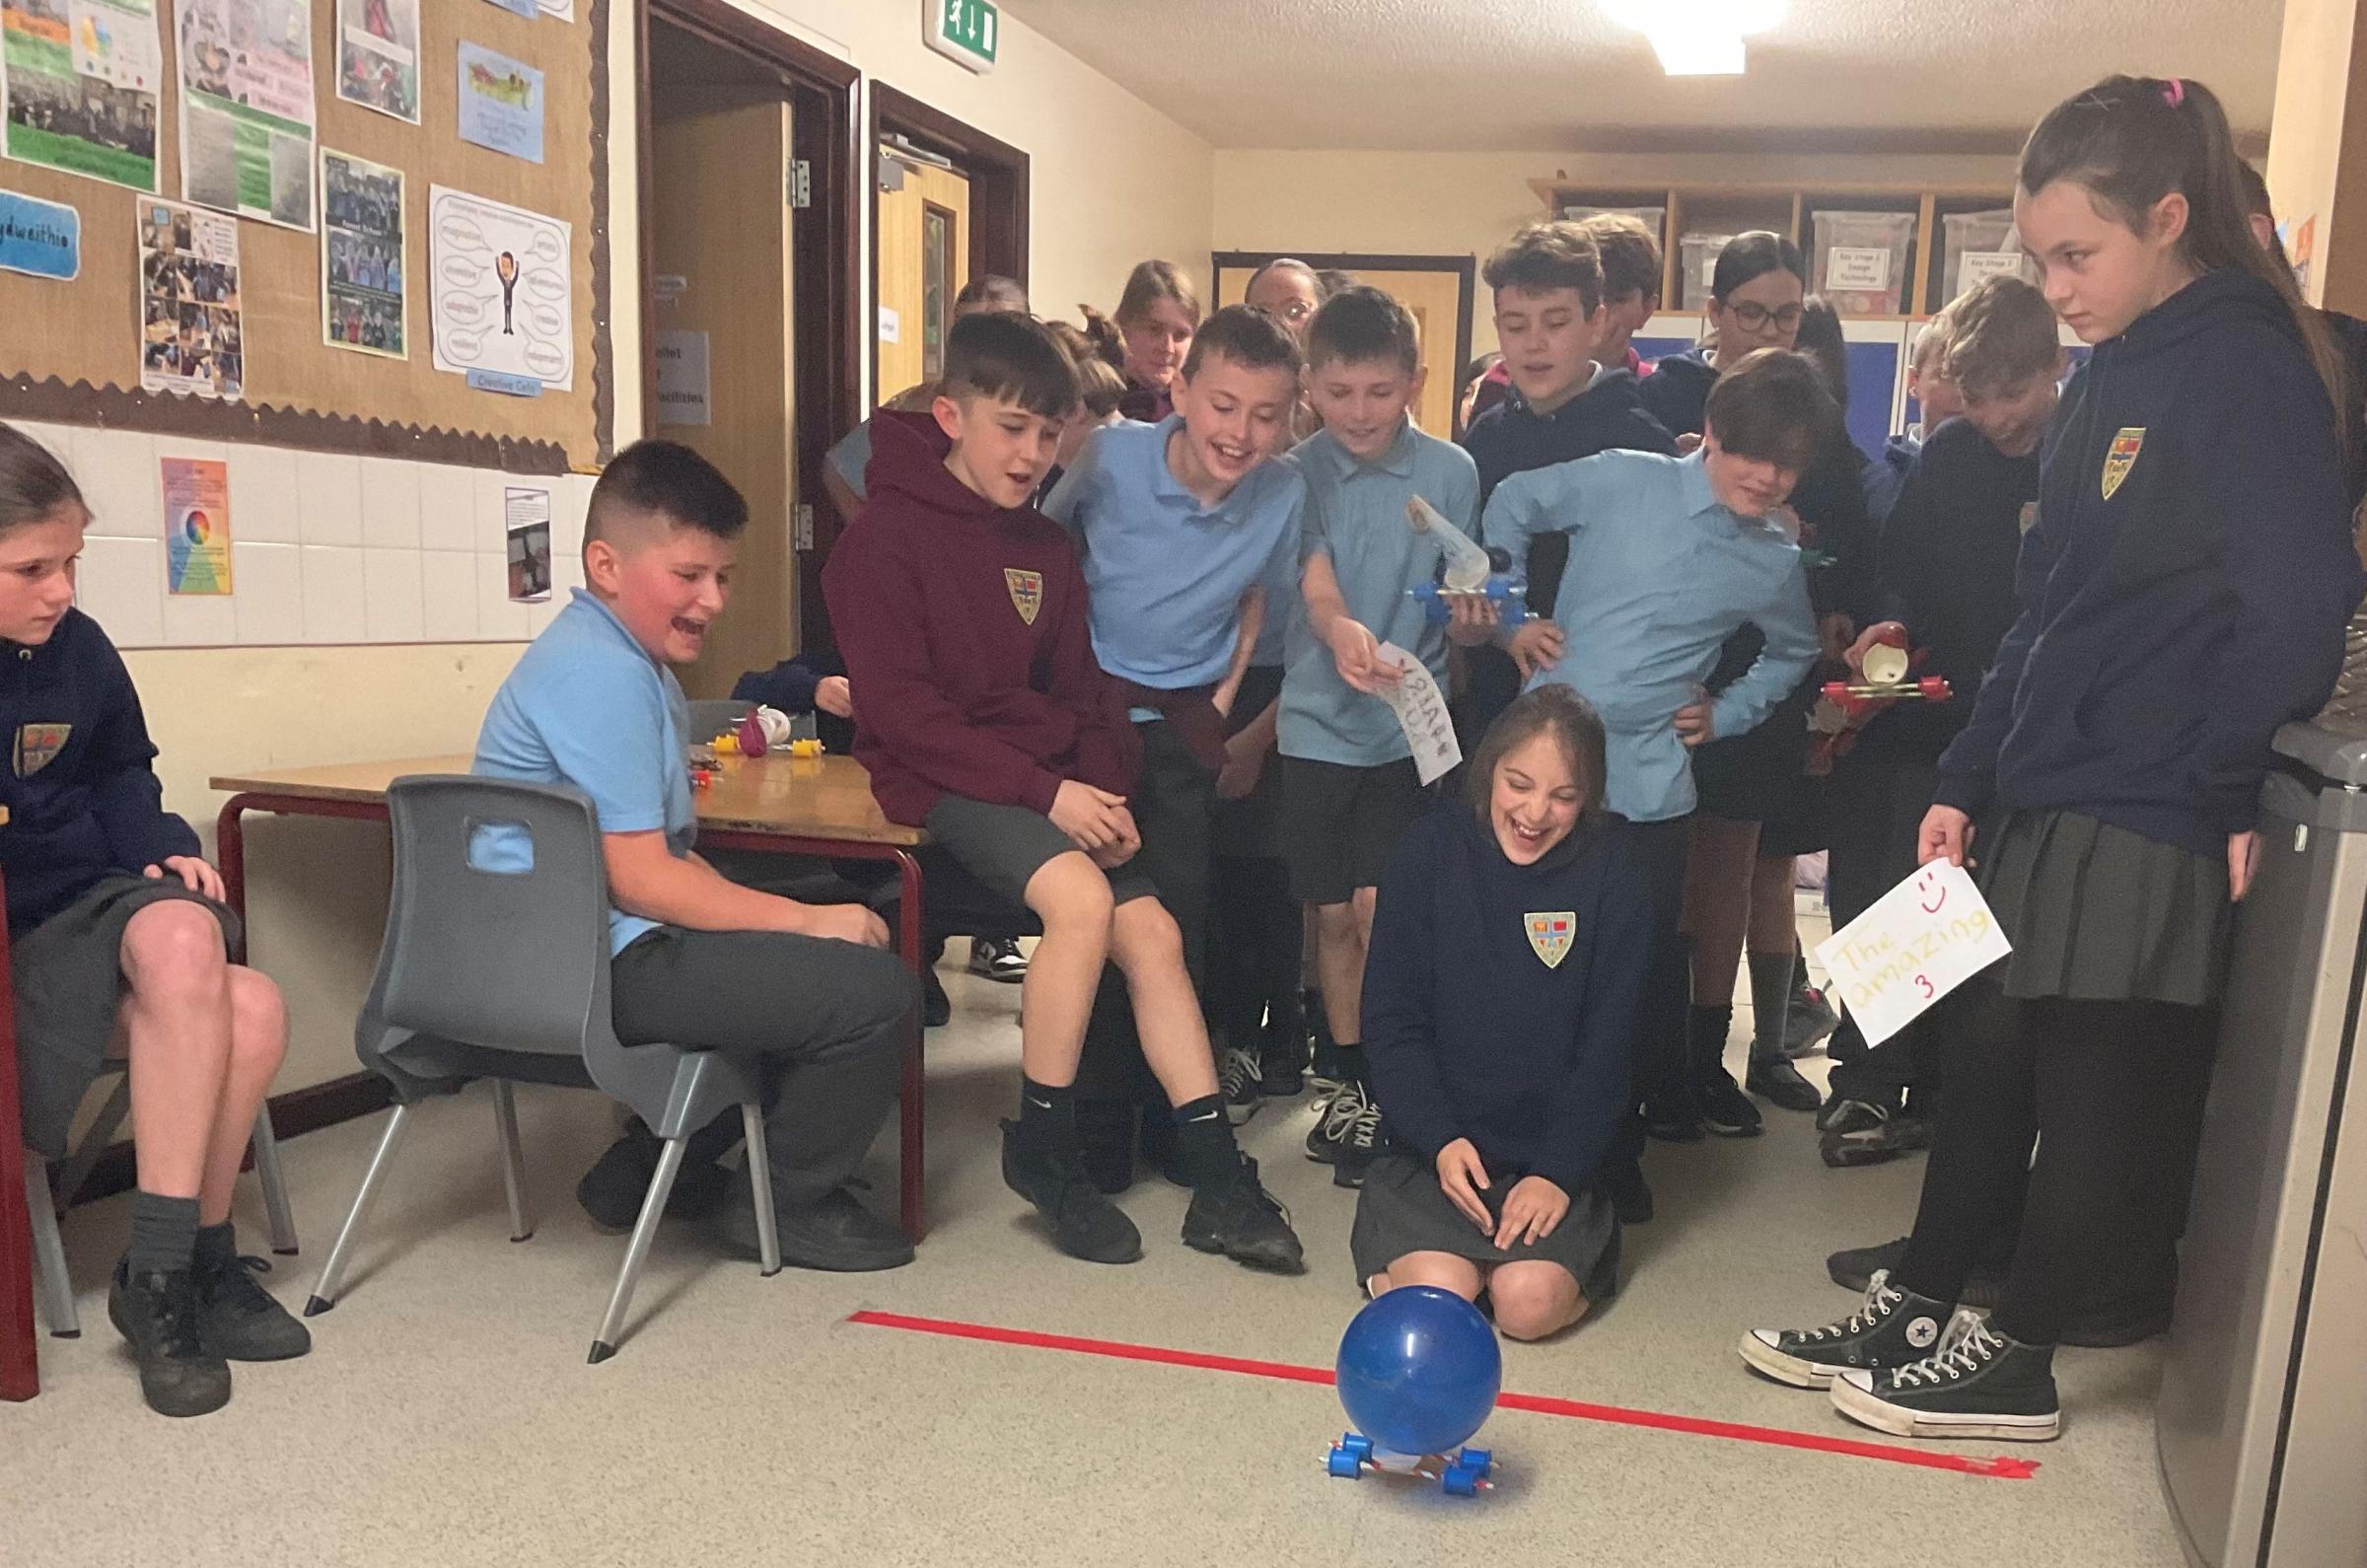 St Marys pupils take part in STEM-based challenges.